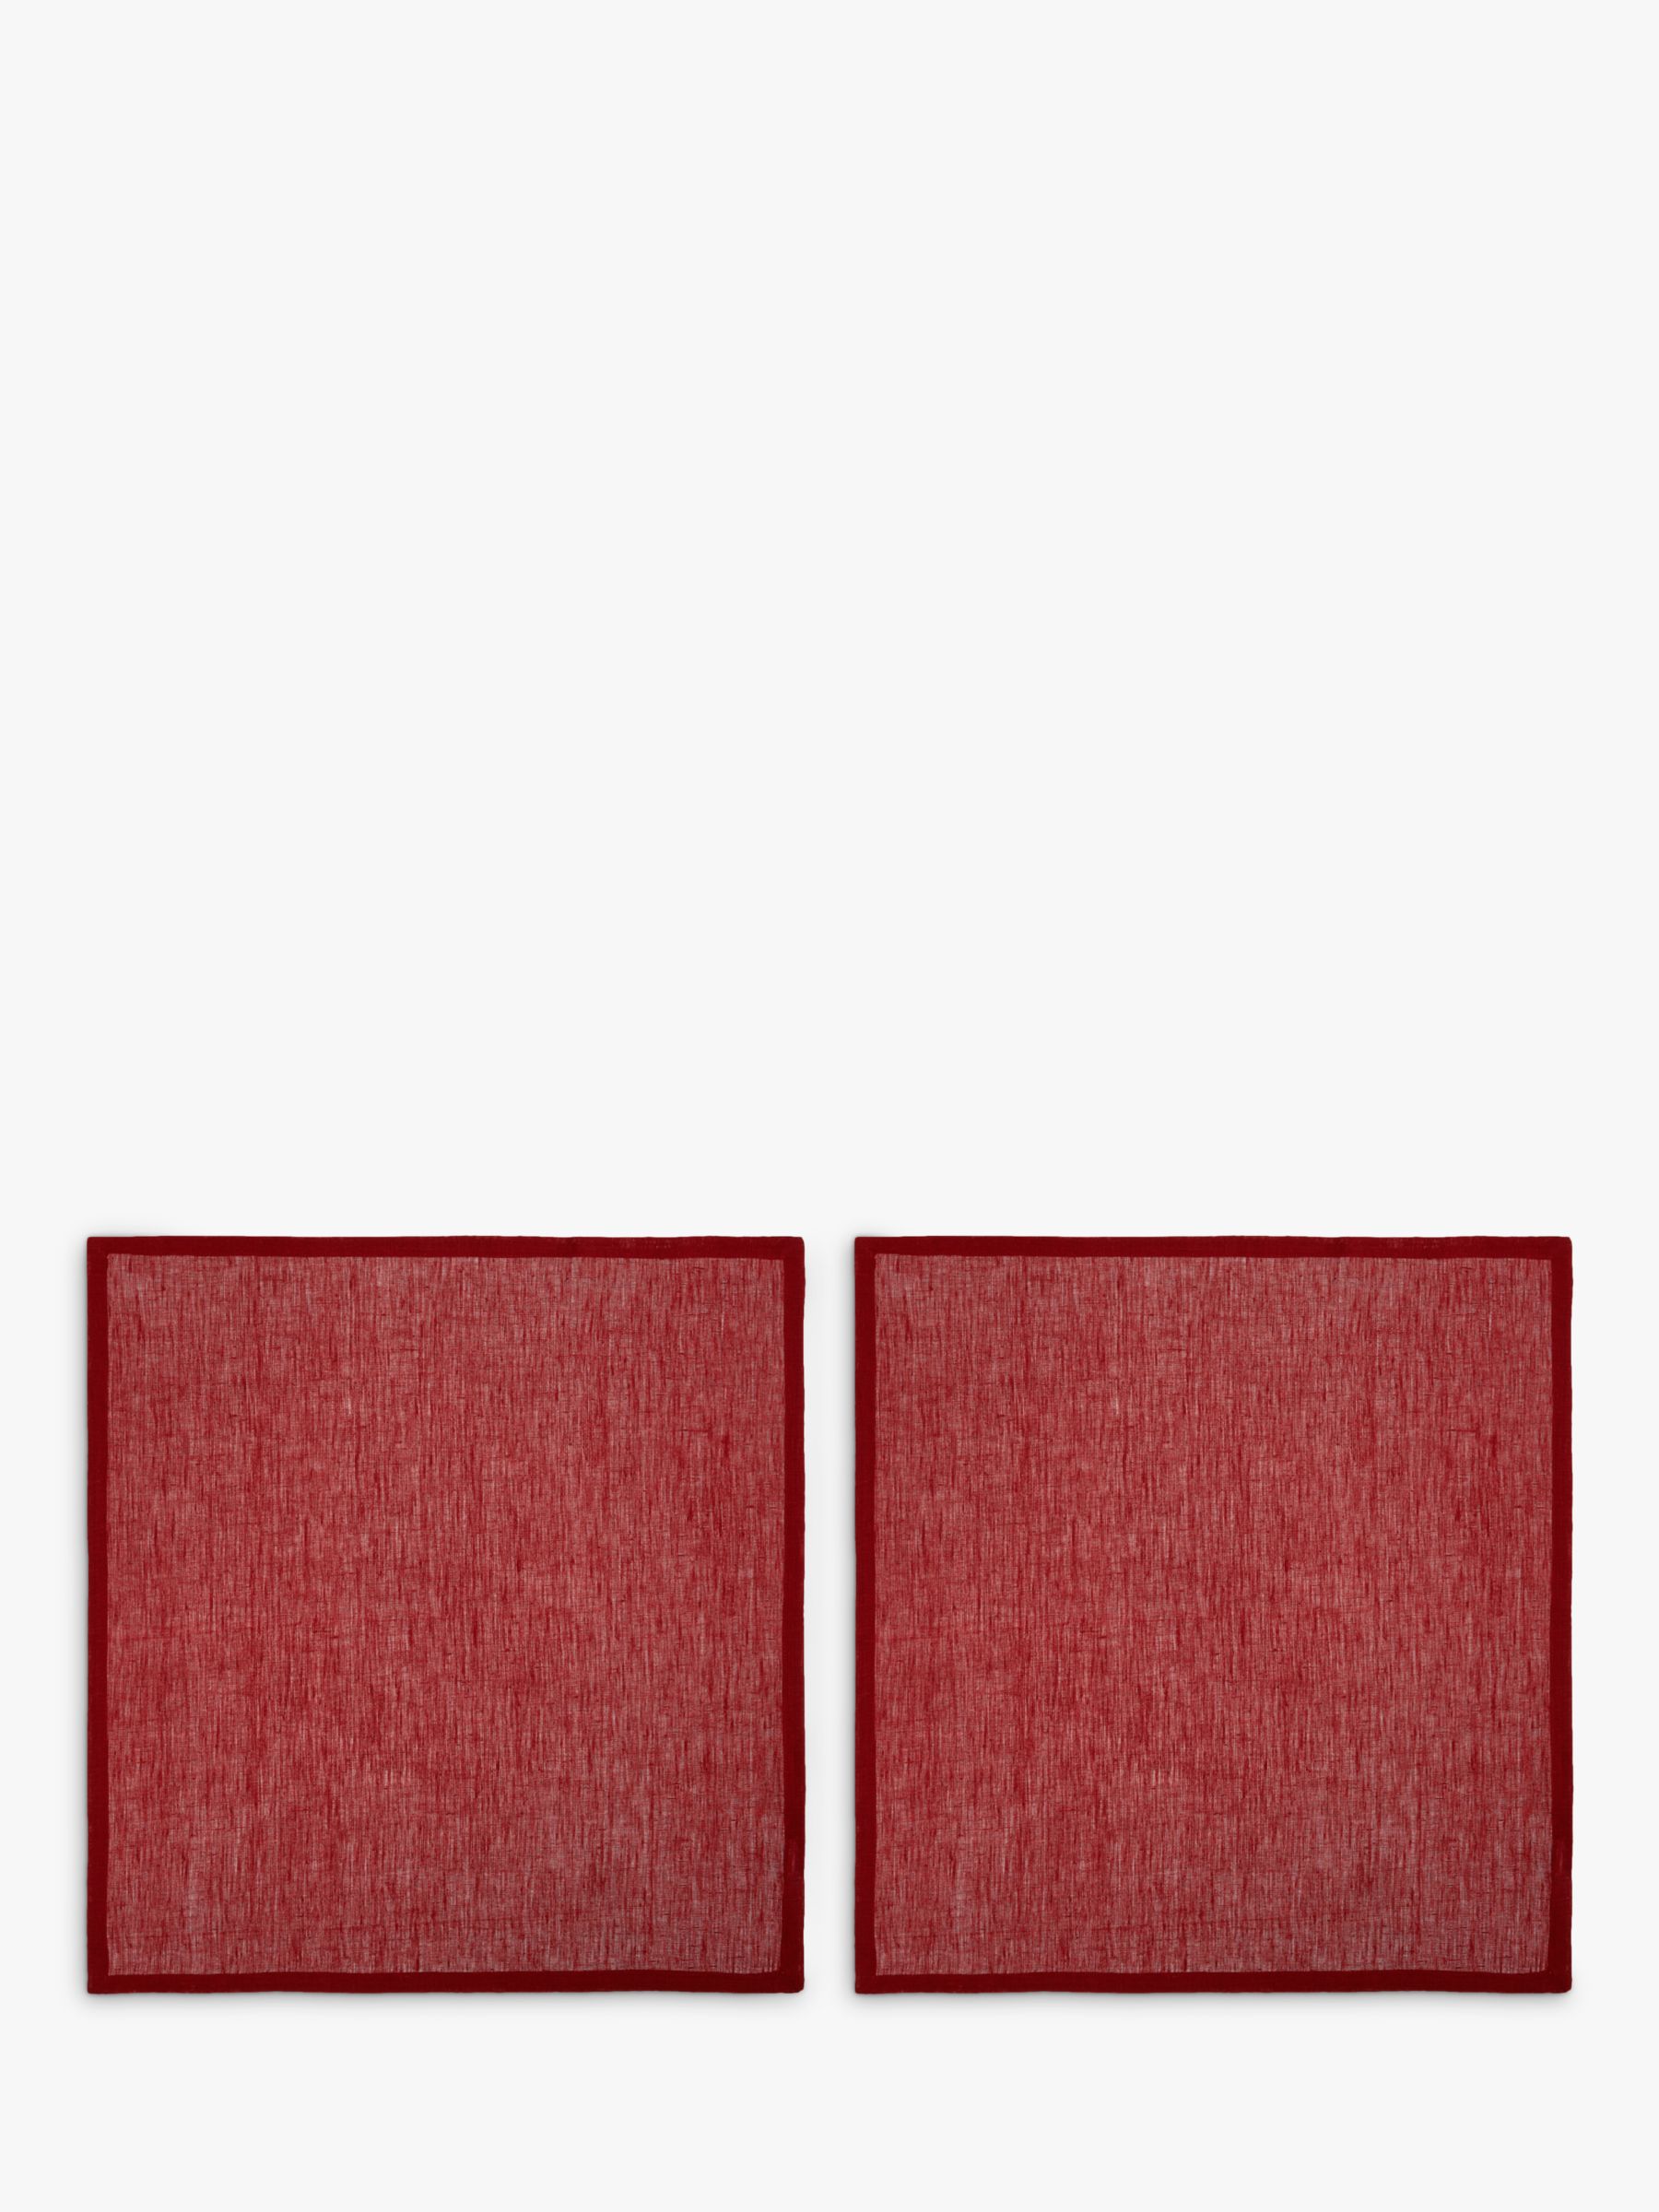 Croft Collection Linen Napkin, Set of 2, Red